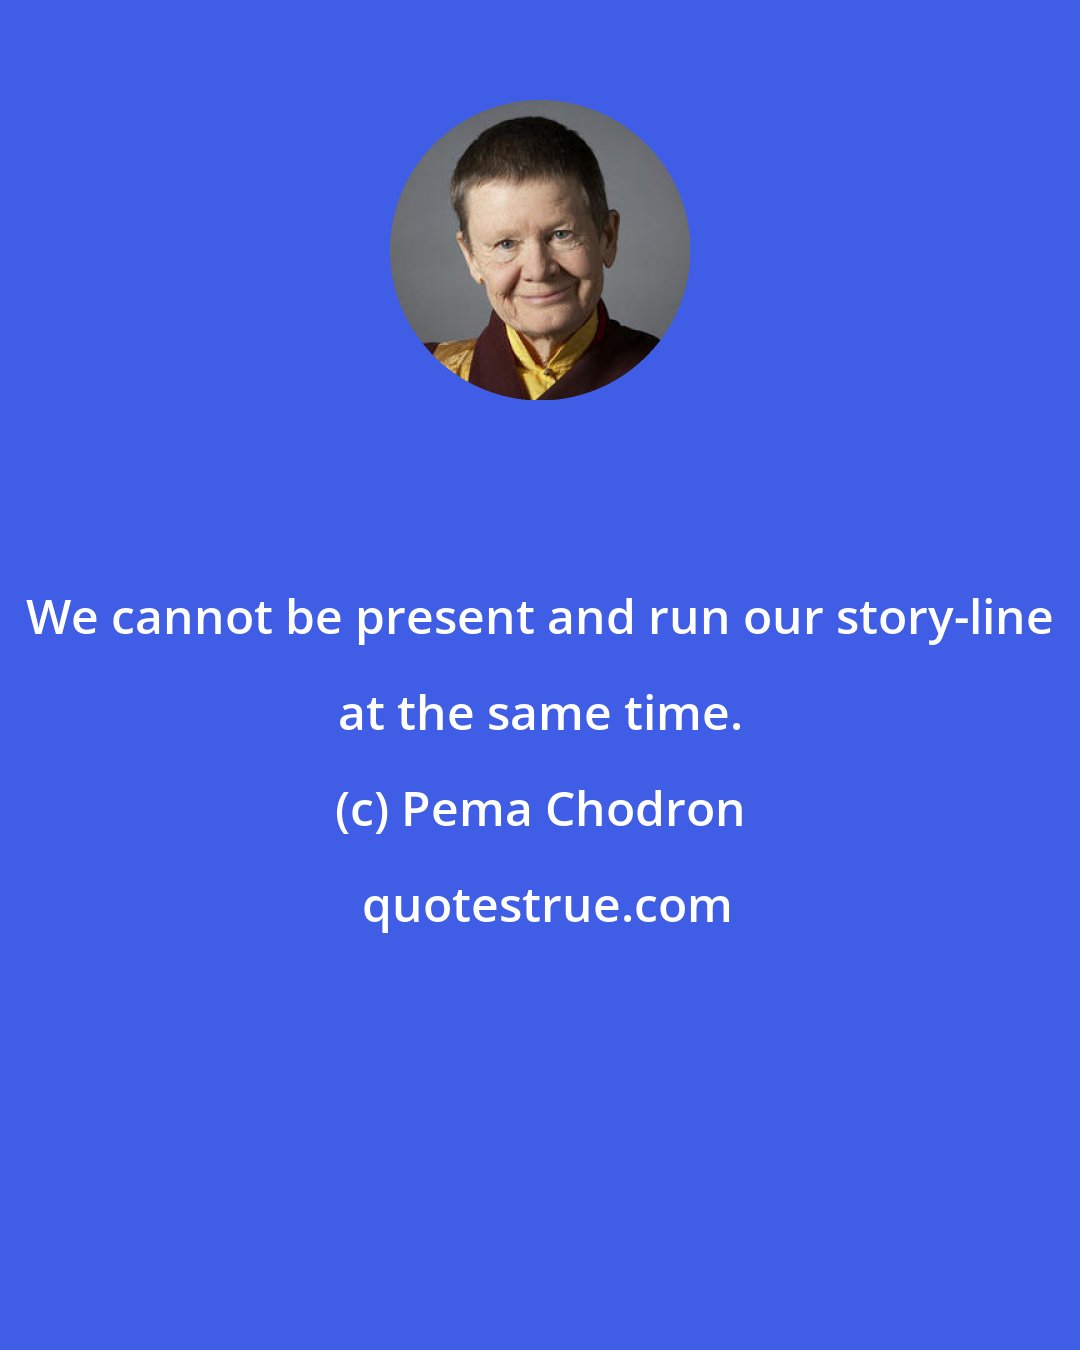 Pema Chodron: We cannot be present and run our story-line at the same time.